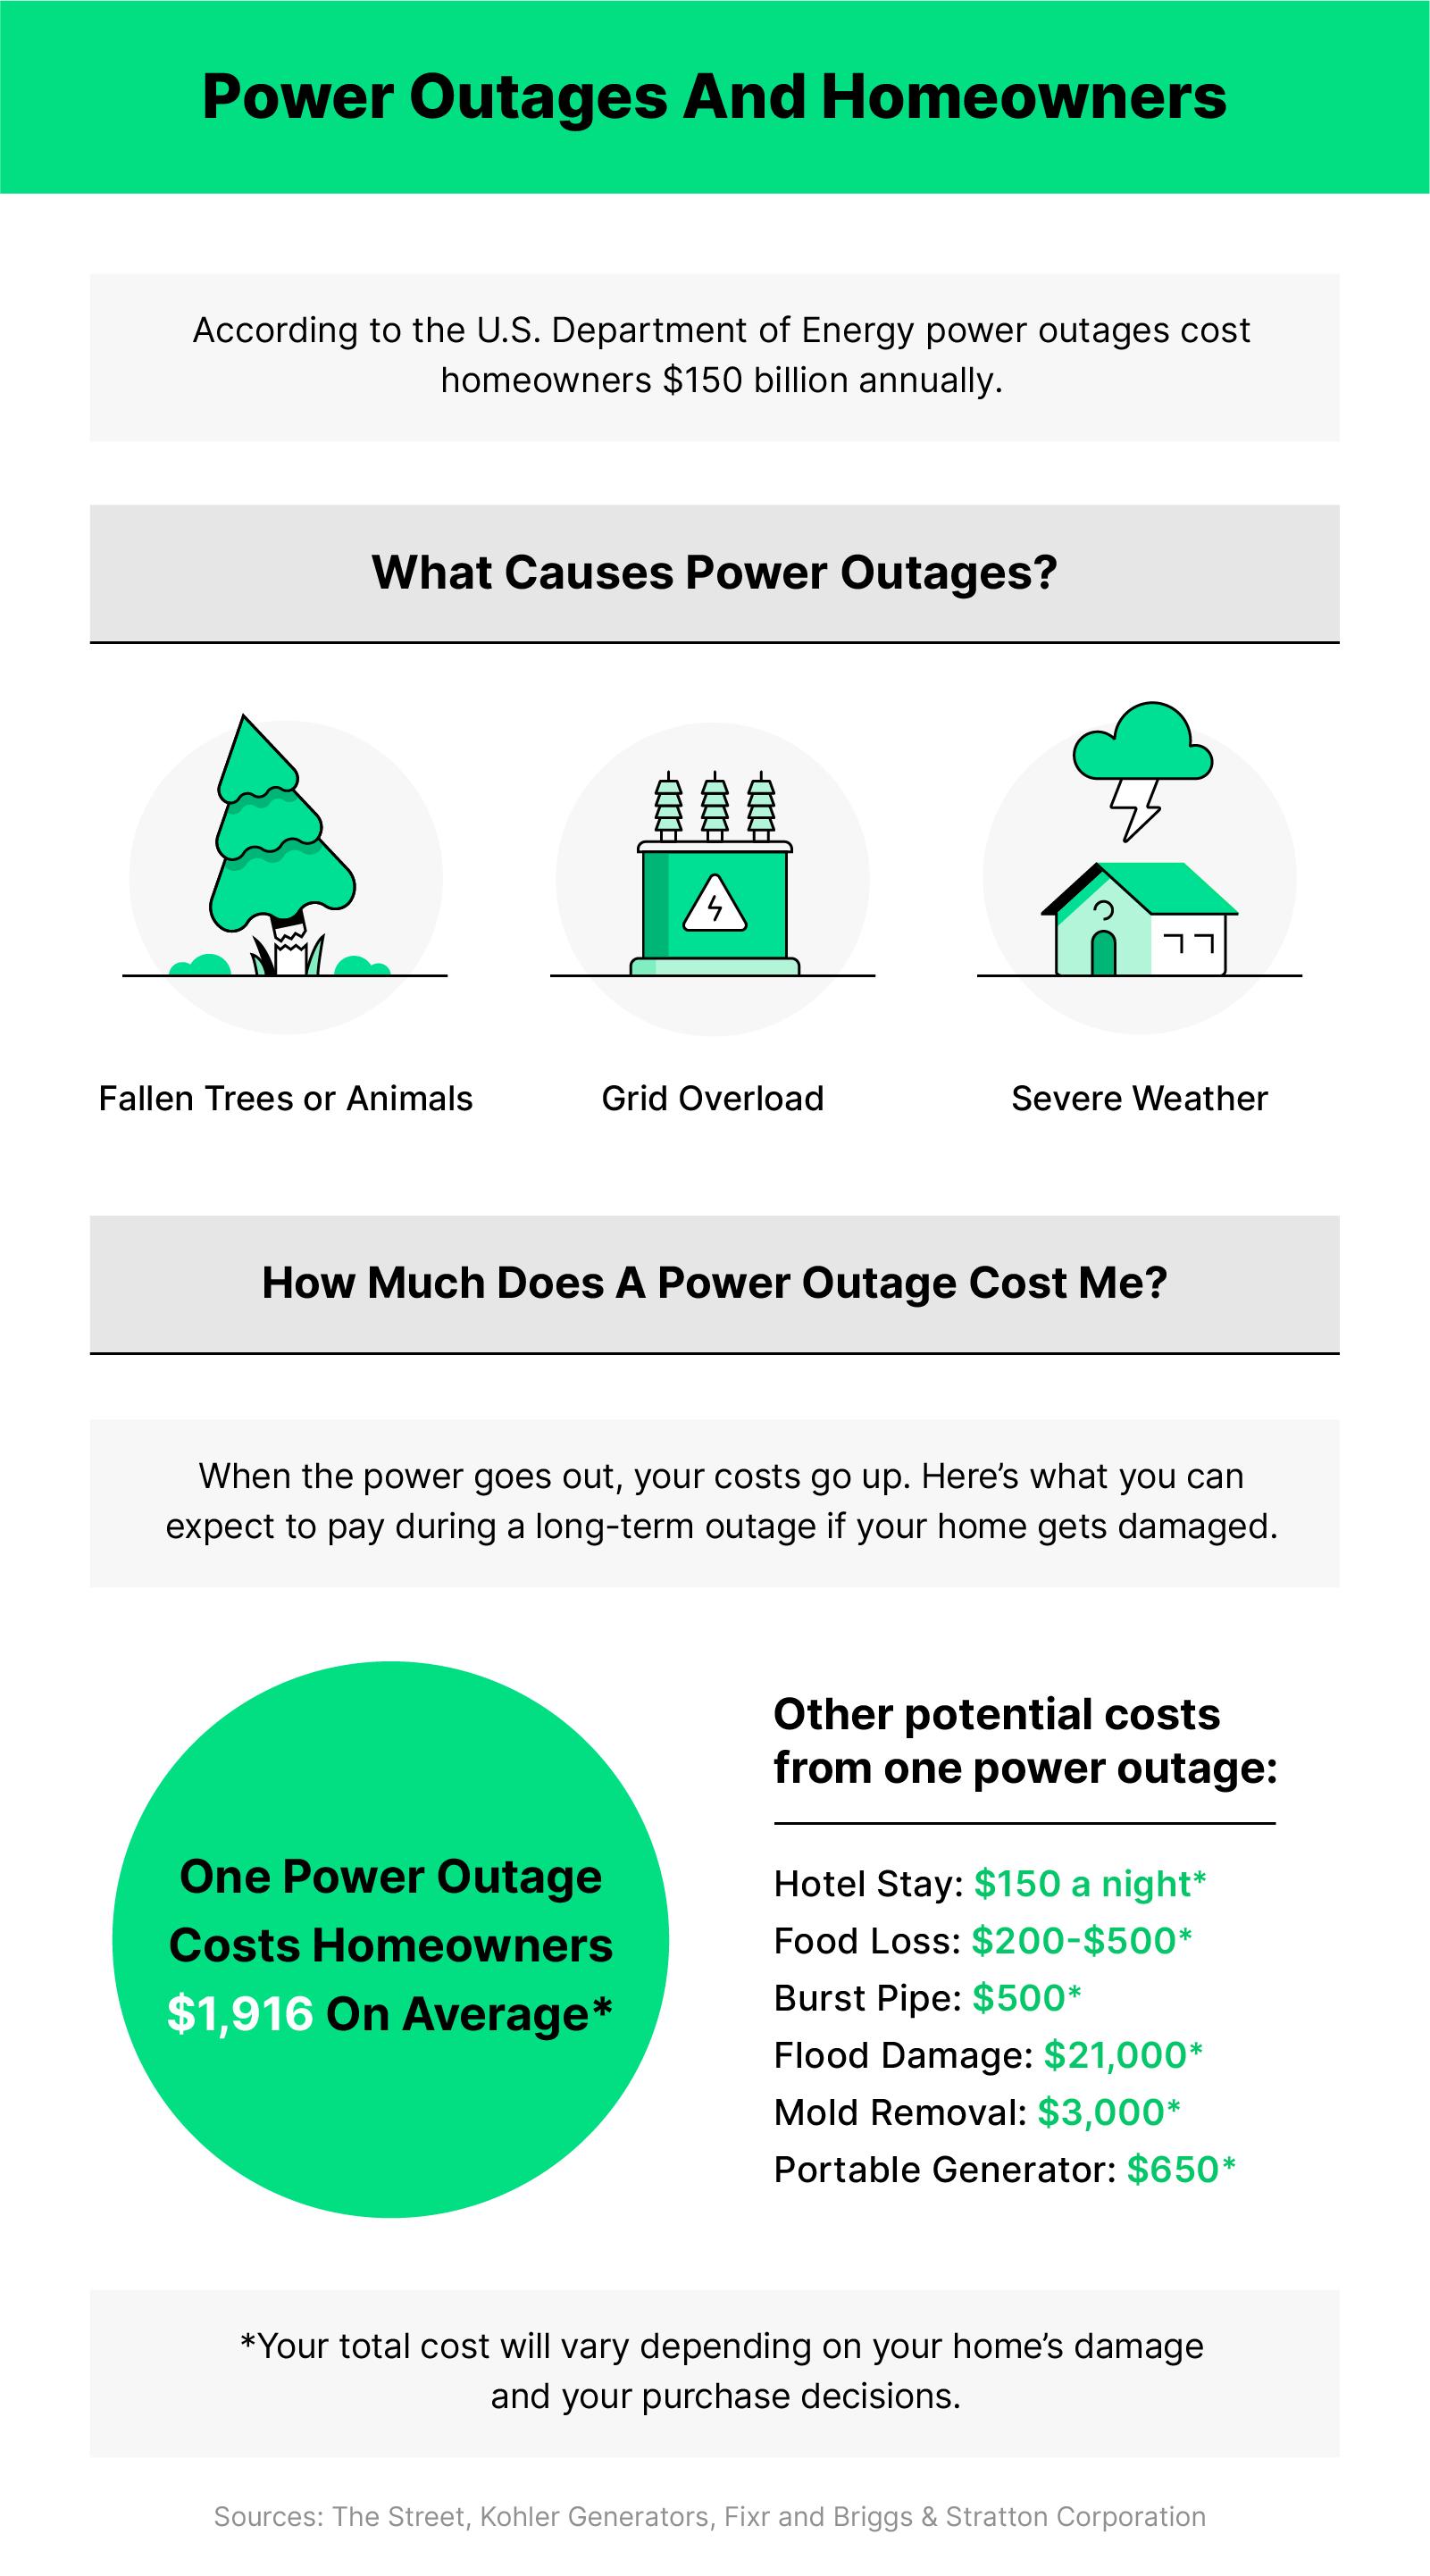 Power Outage Preparedness  What To Do If There Is A Power Outage